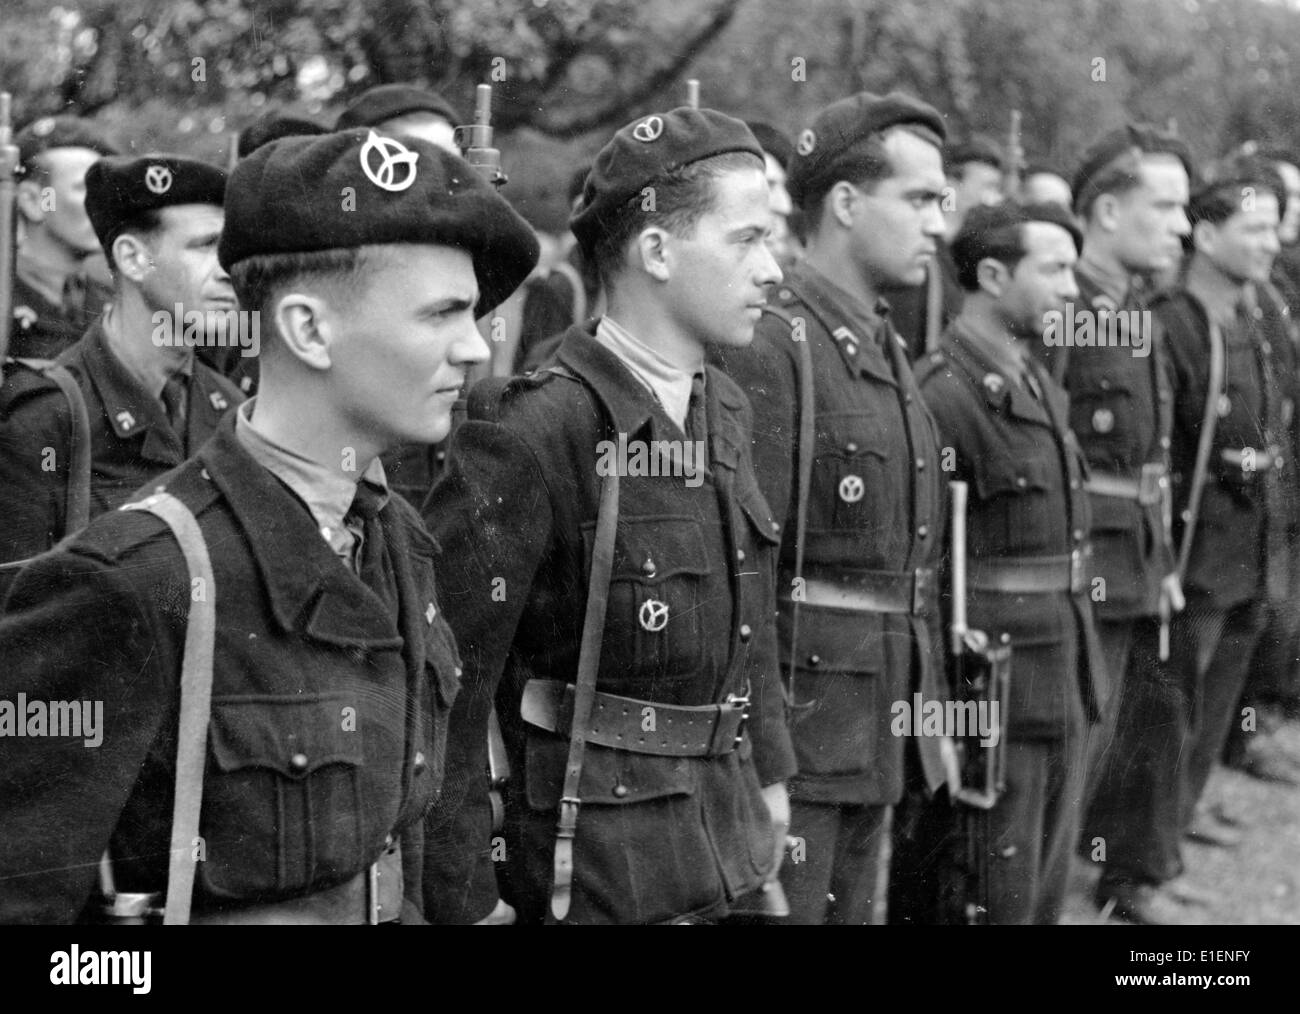 Soldiers from the French Militia stand during training to support the German army in Ploermel, June 1944. The Fench Militia was used mainly to combat the French resistance starting in January 1944. Fotoarchiv für Zeitgeschichtee - NO WIRE SERVICE Stock Photo